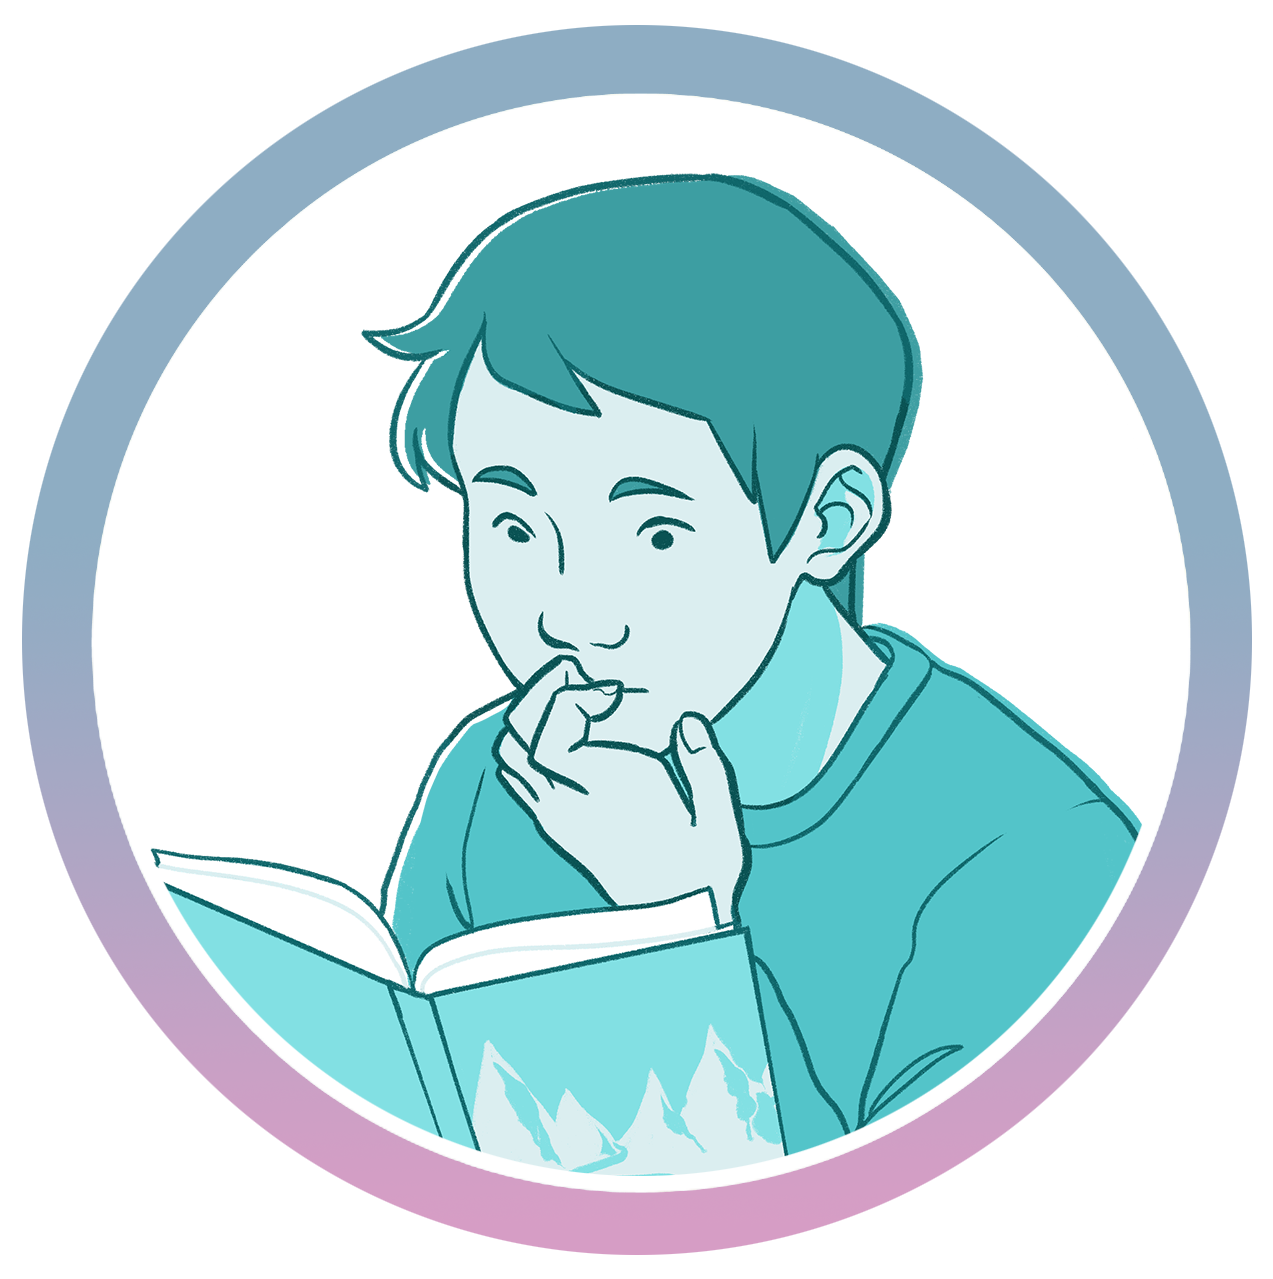 An illustration of a boy reading a book.